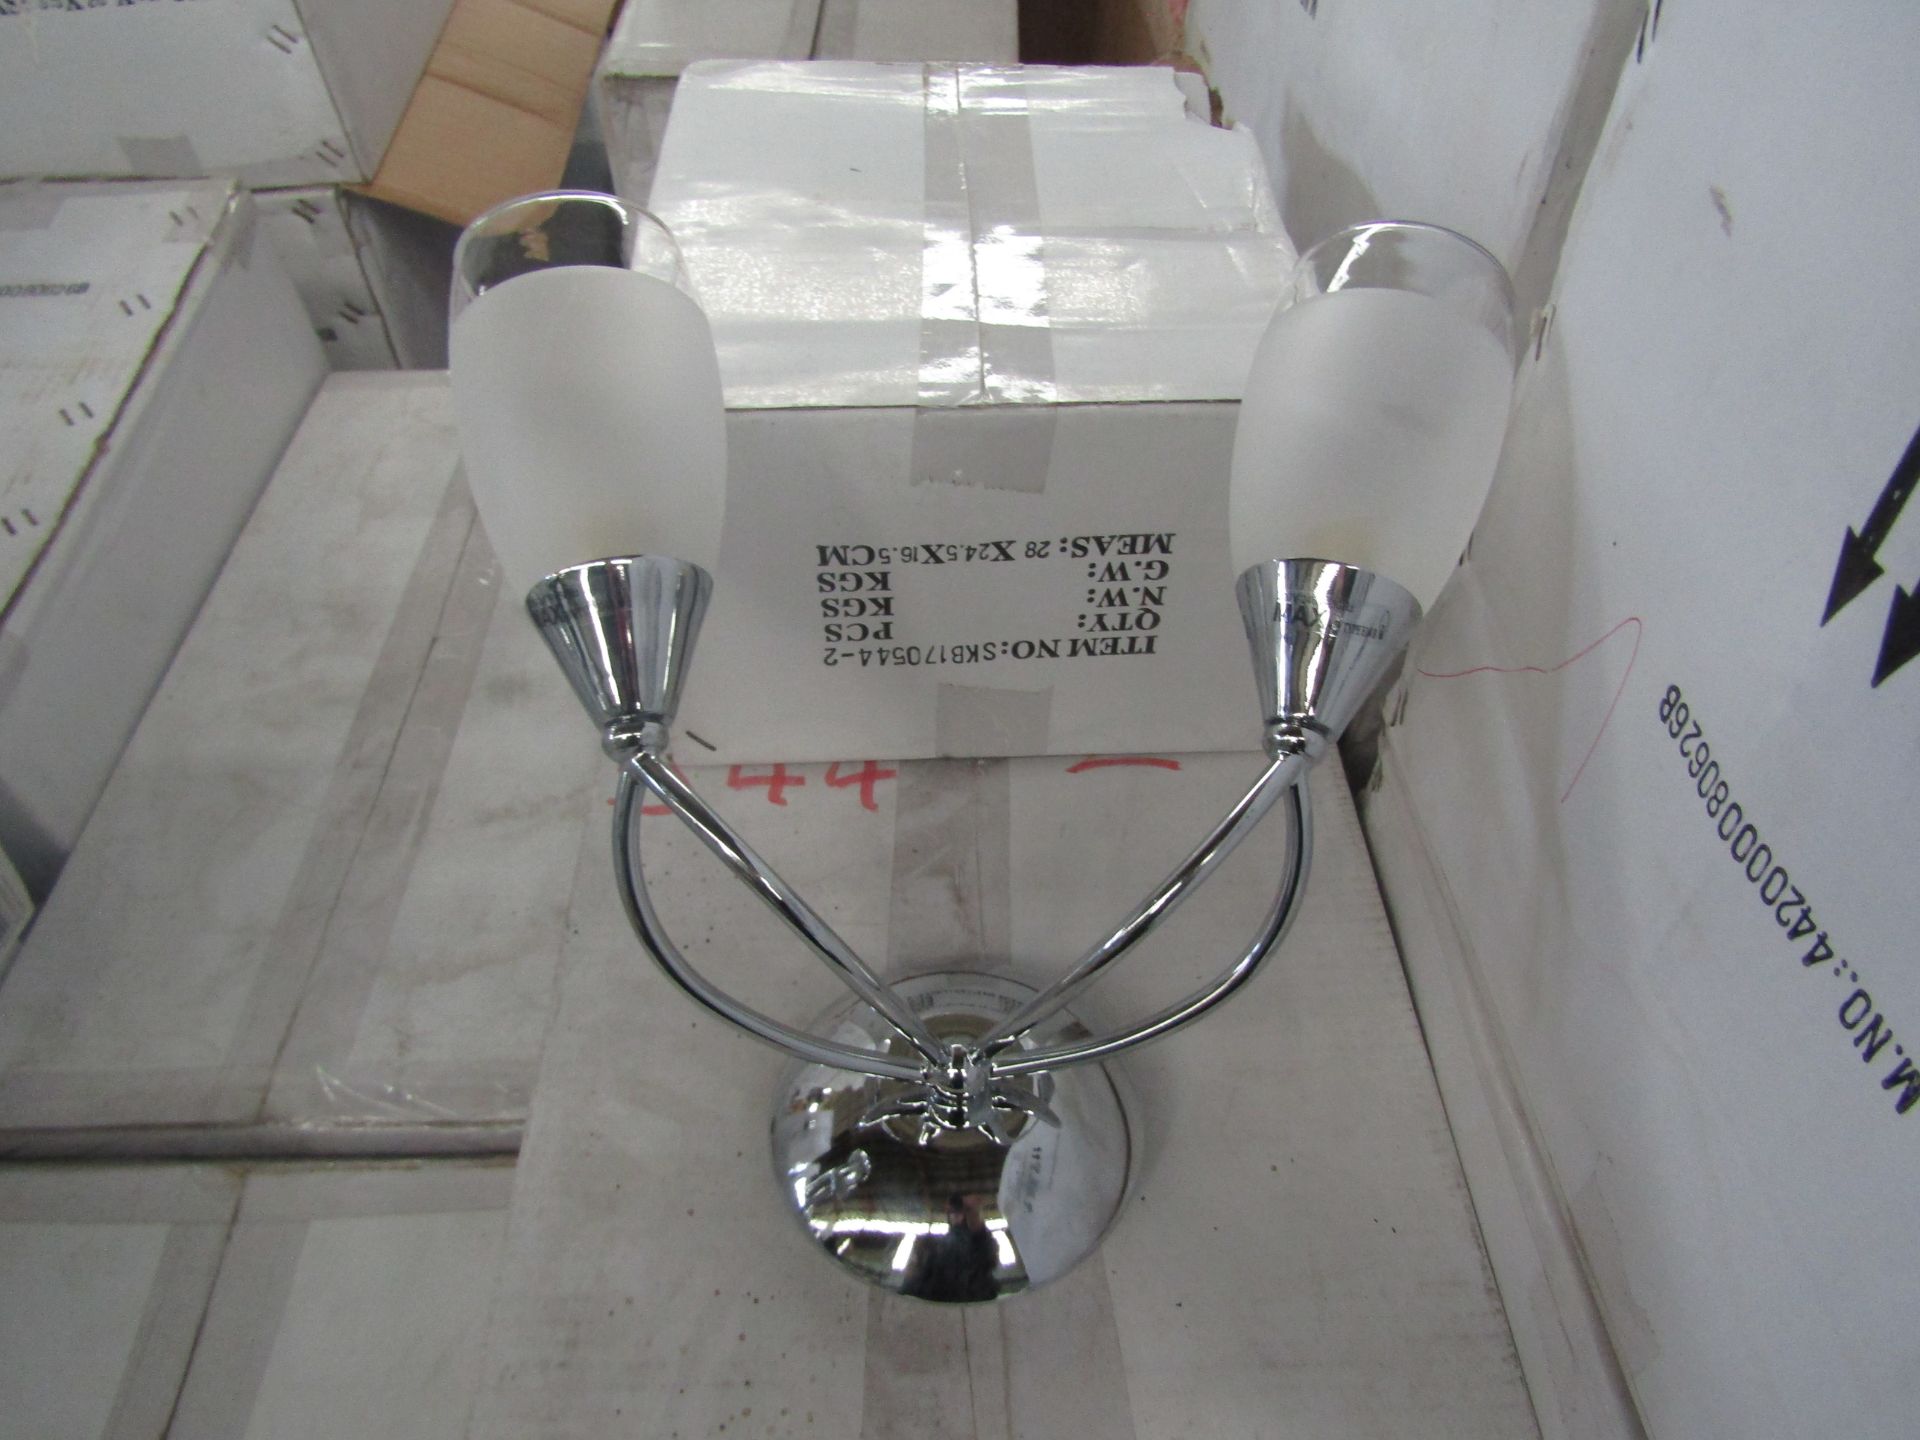 Chrome 2 Arm wall light fitting.with 3/4 frosted glass shades. H30cm x 30cm)New & Boxed. (544-2)